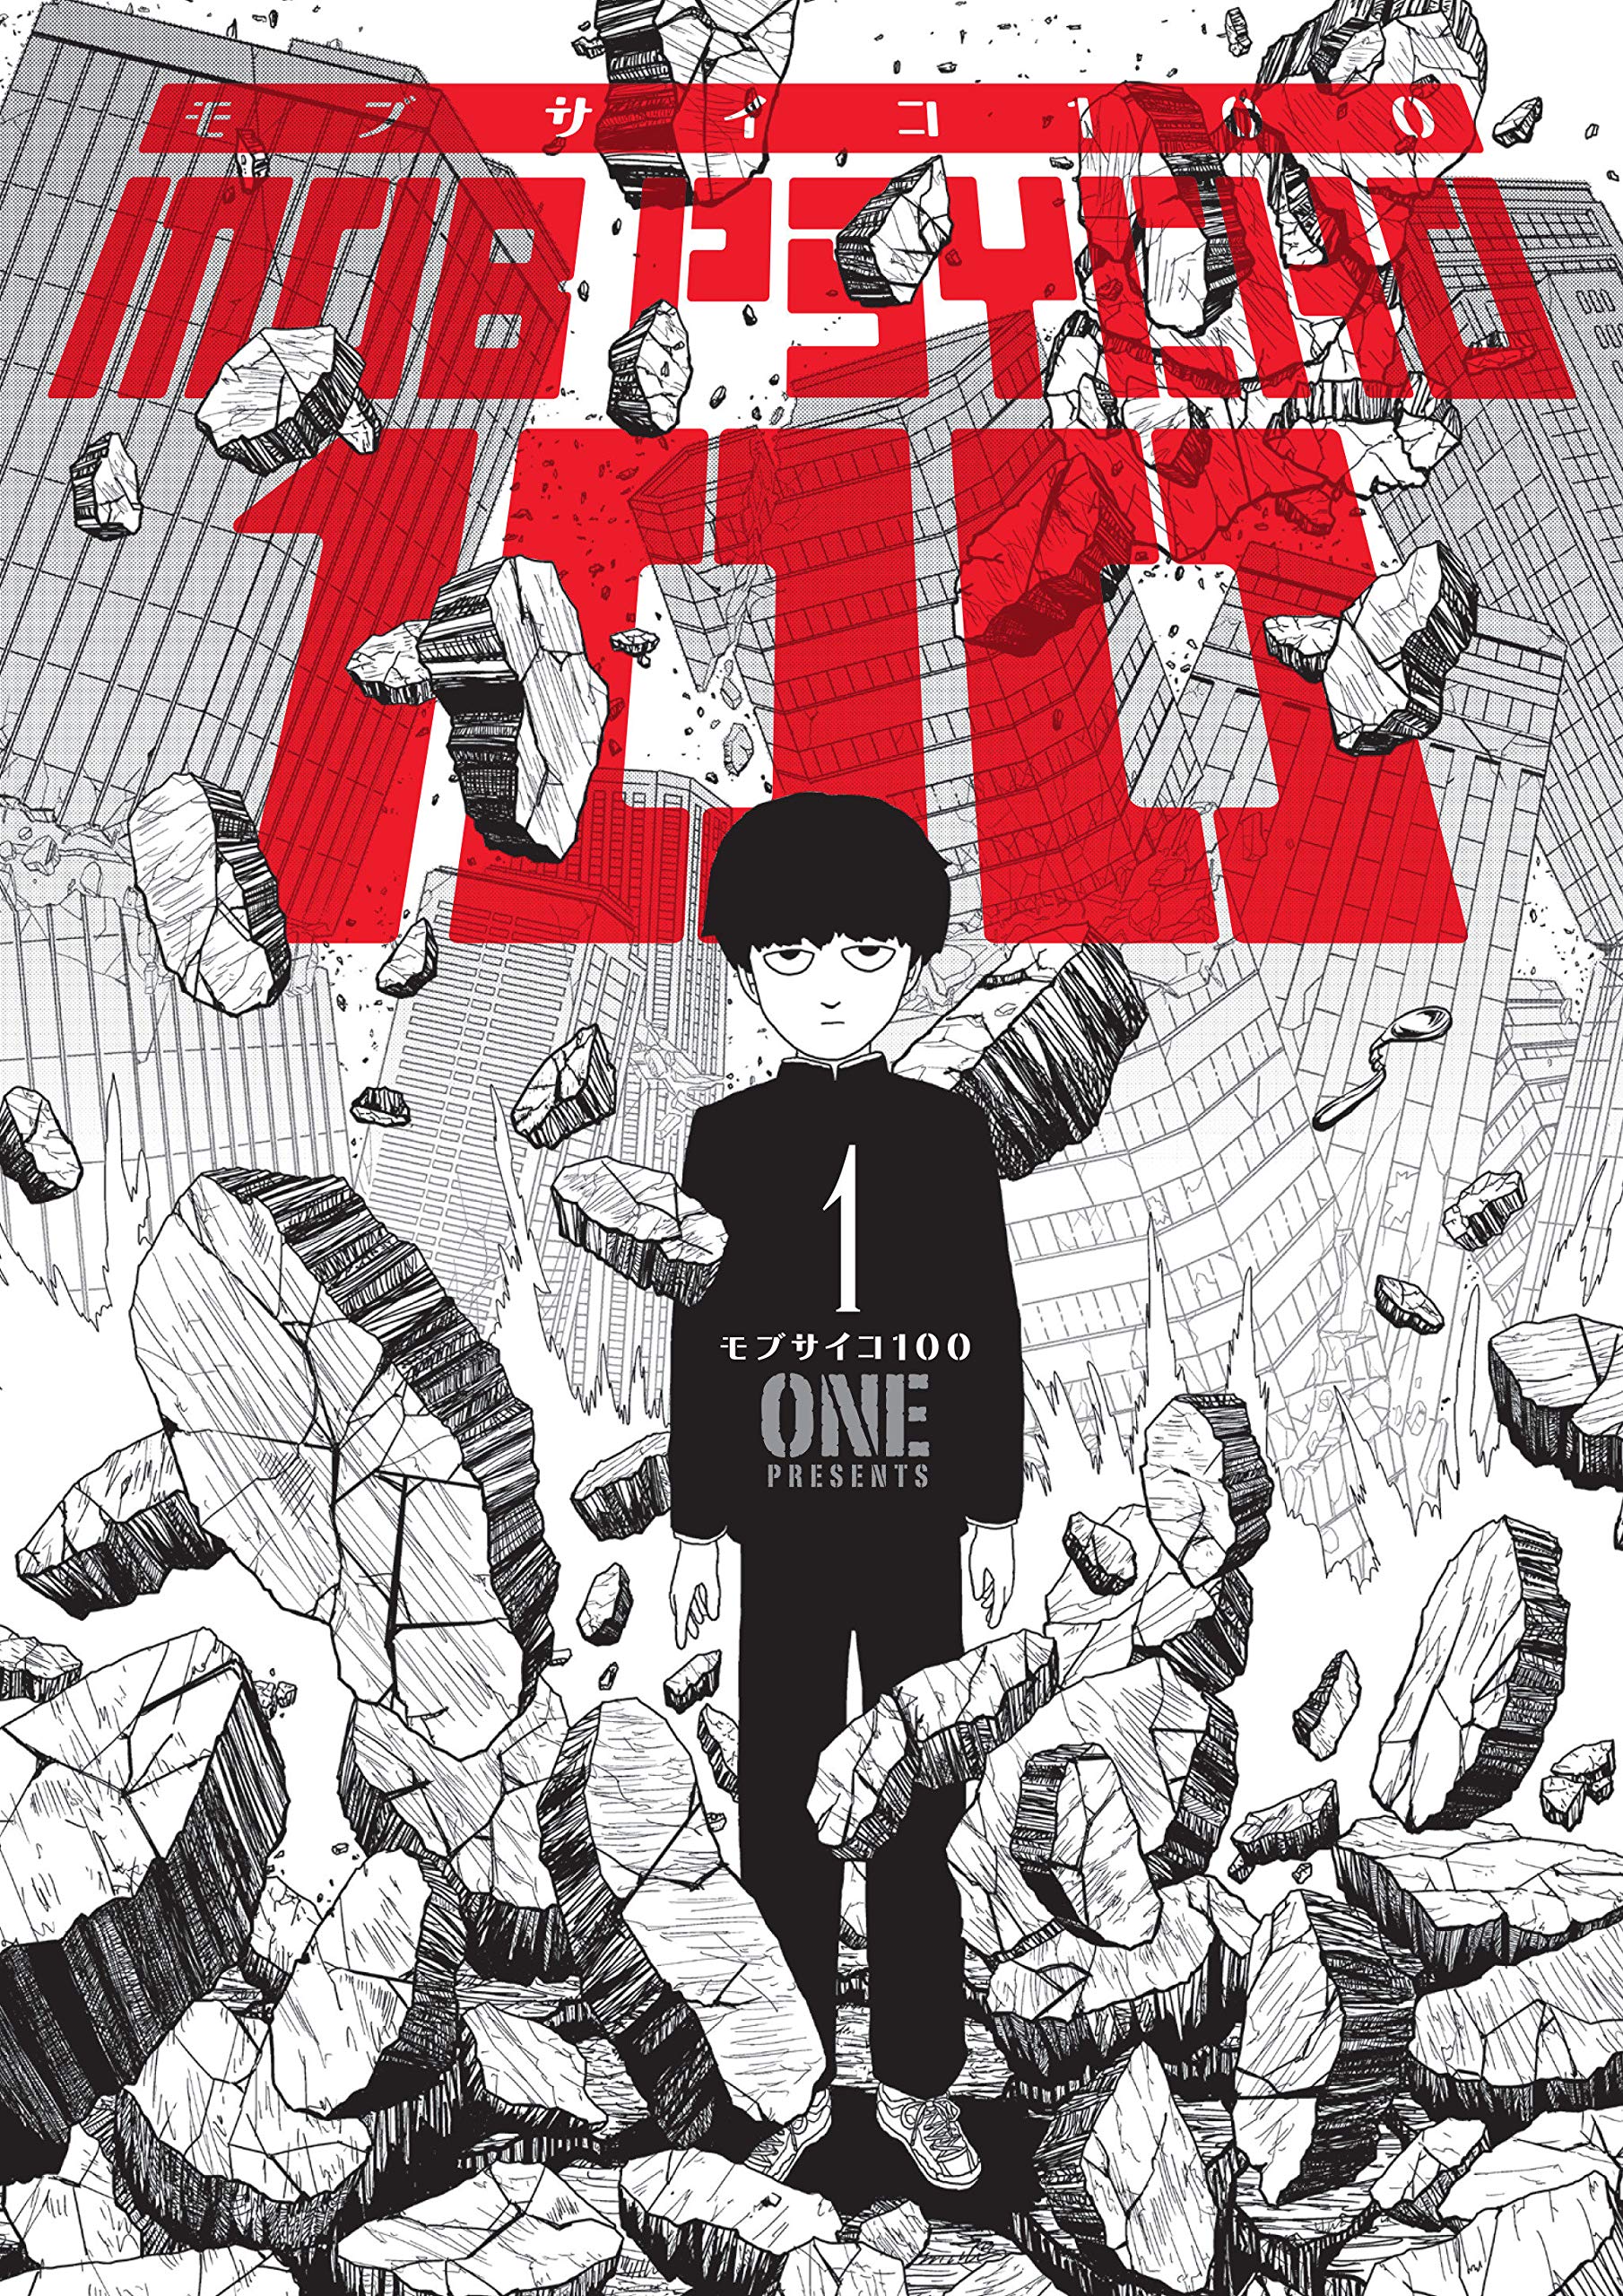 QUIZ: How Would You Make Mob from Mob Psycho 100 Go 100 Percent? -  Crunchyroll News